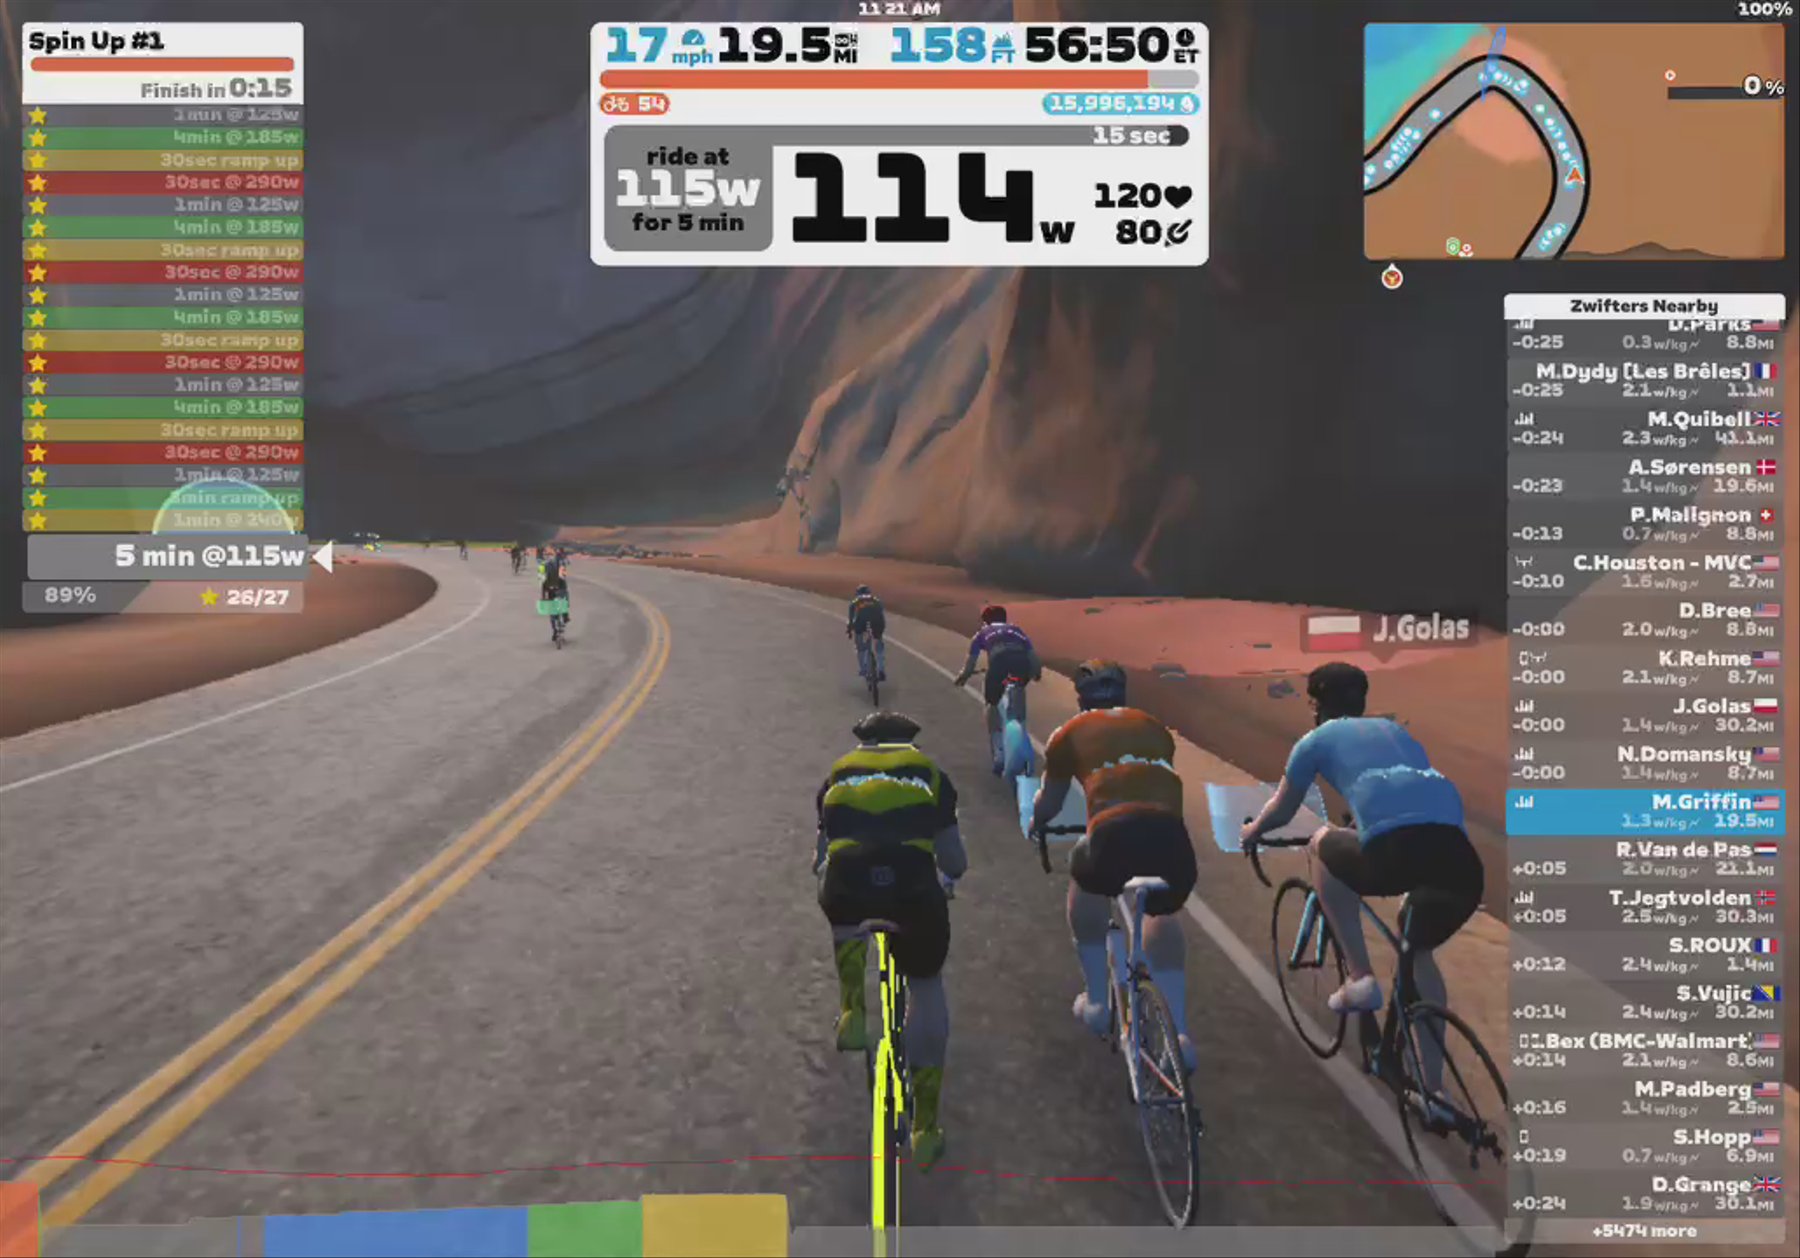 89 - Zwift - Spin Up #1 in Watopia